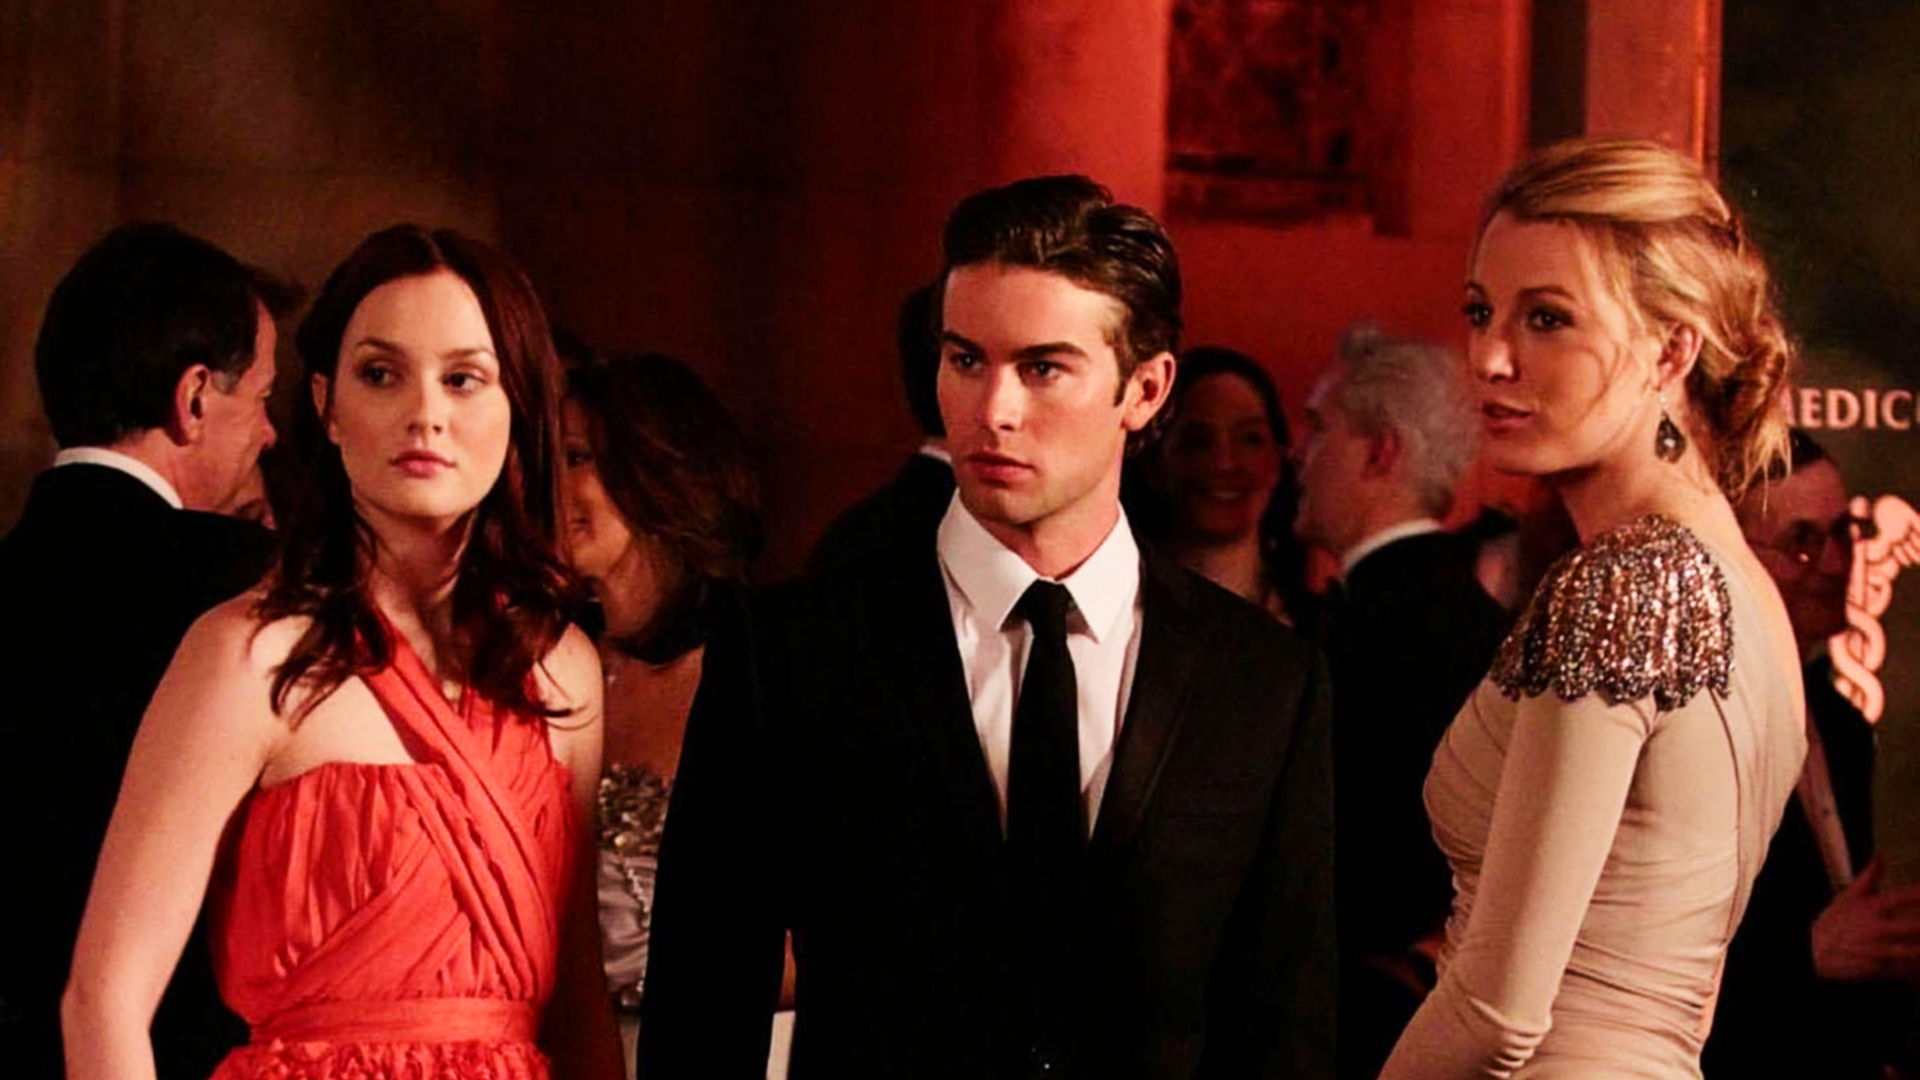 Gossip Girl With a Twist: How Would It Go If Characters Weren't This Toxic